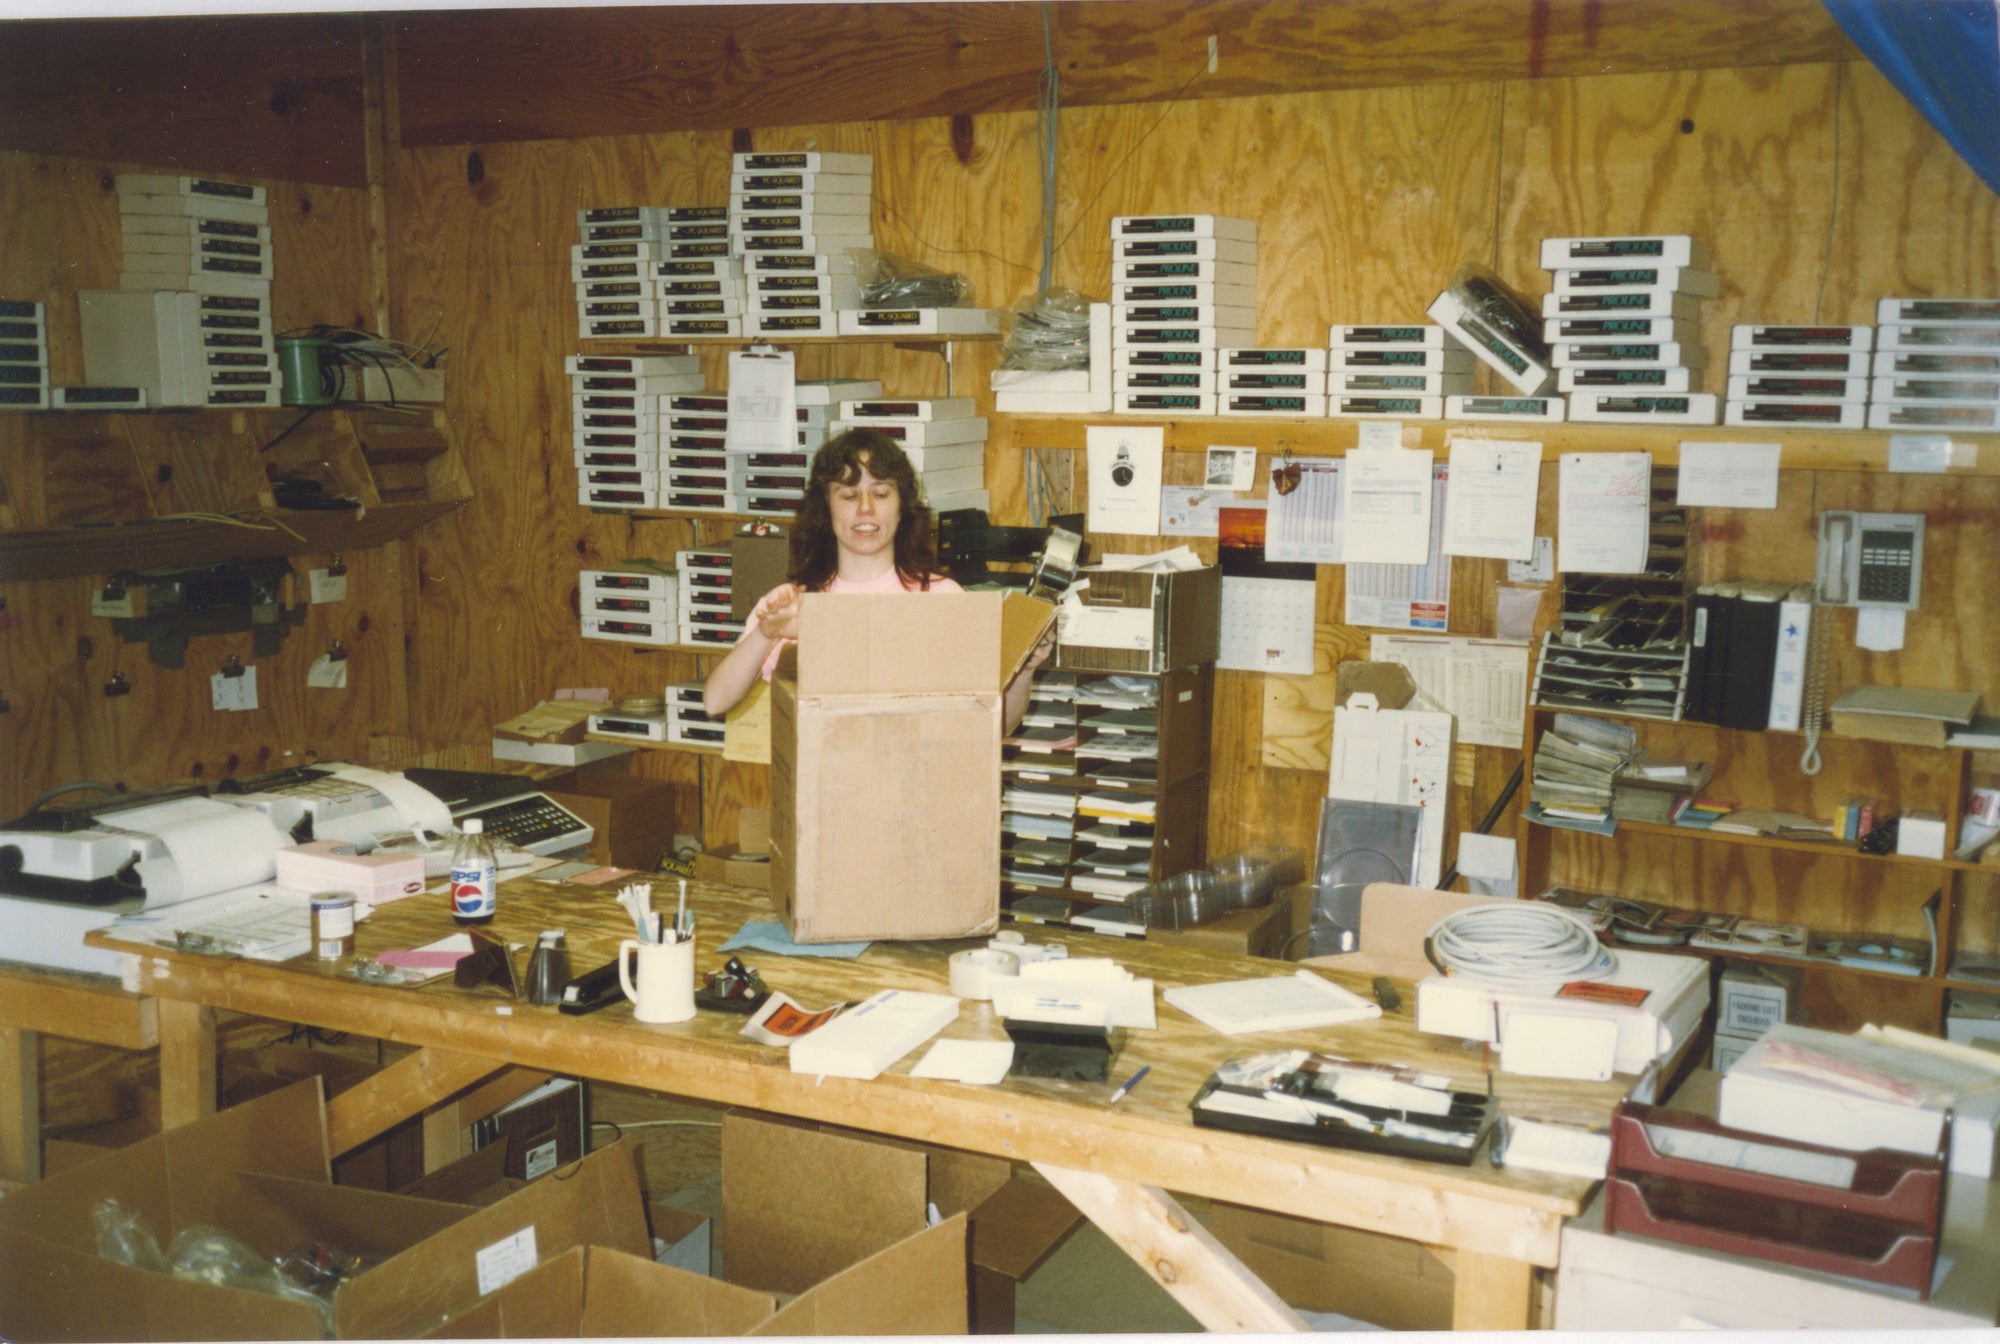 A woman standing in front of a box.